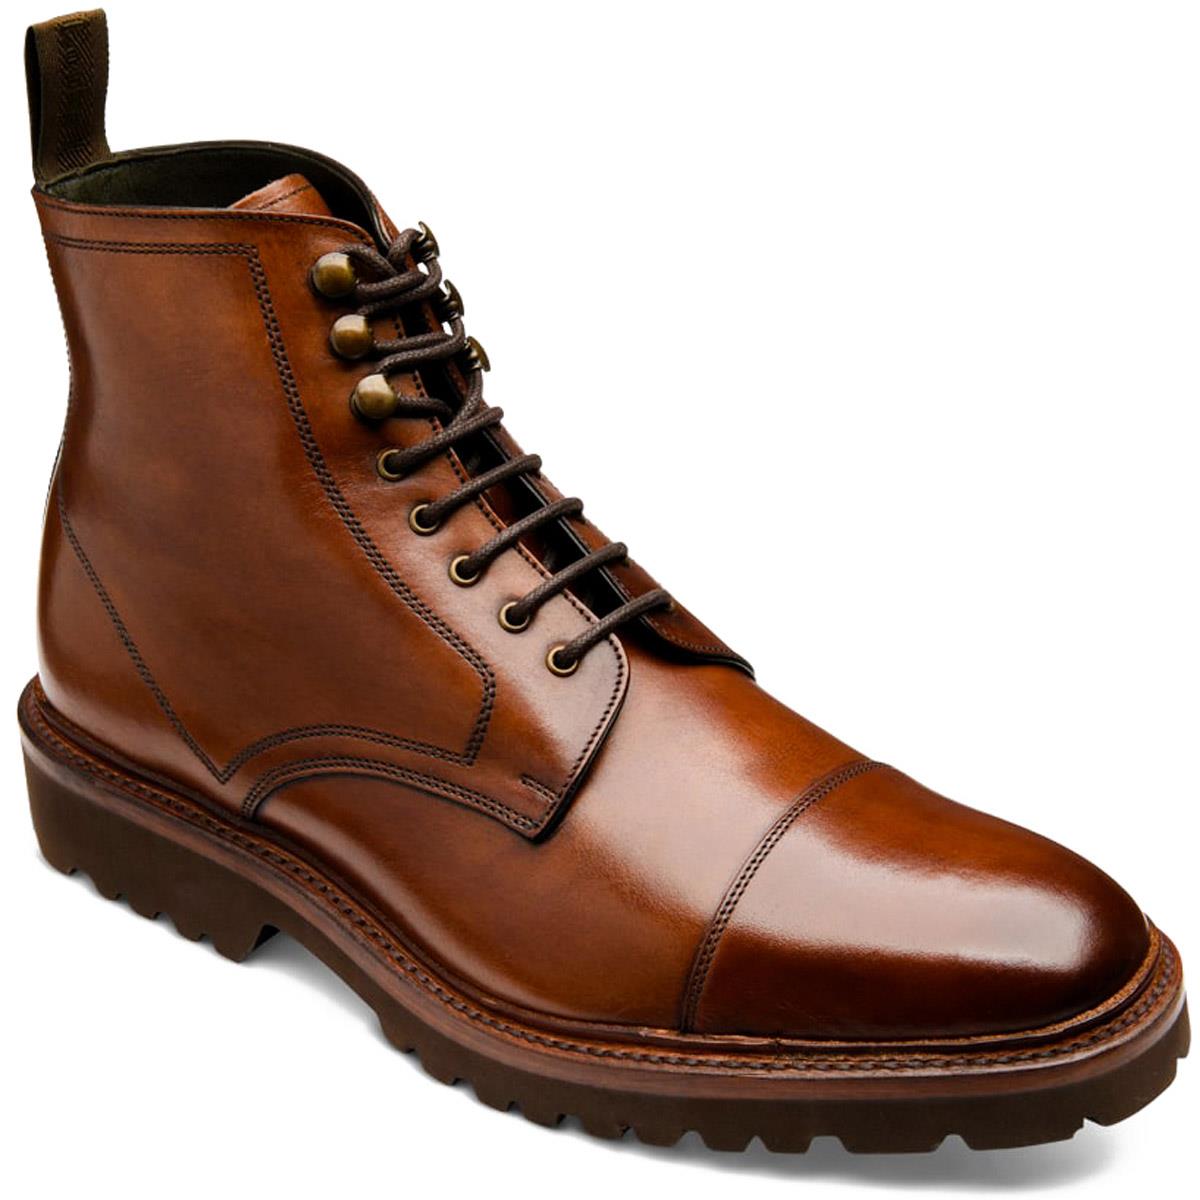 Will a G width on the Loake Mens Aquarius Boots be too wide for me if I usually wear an F fitting?